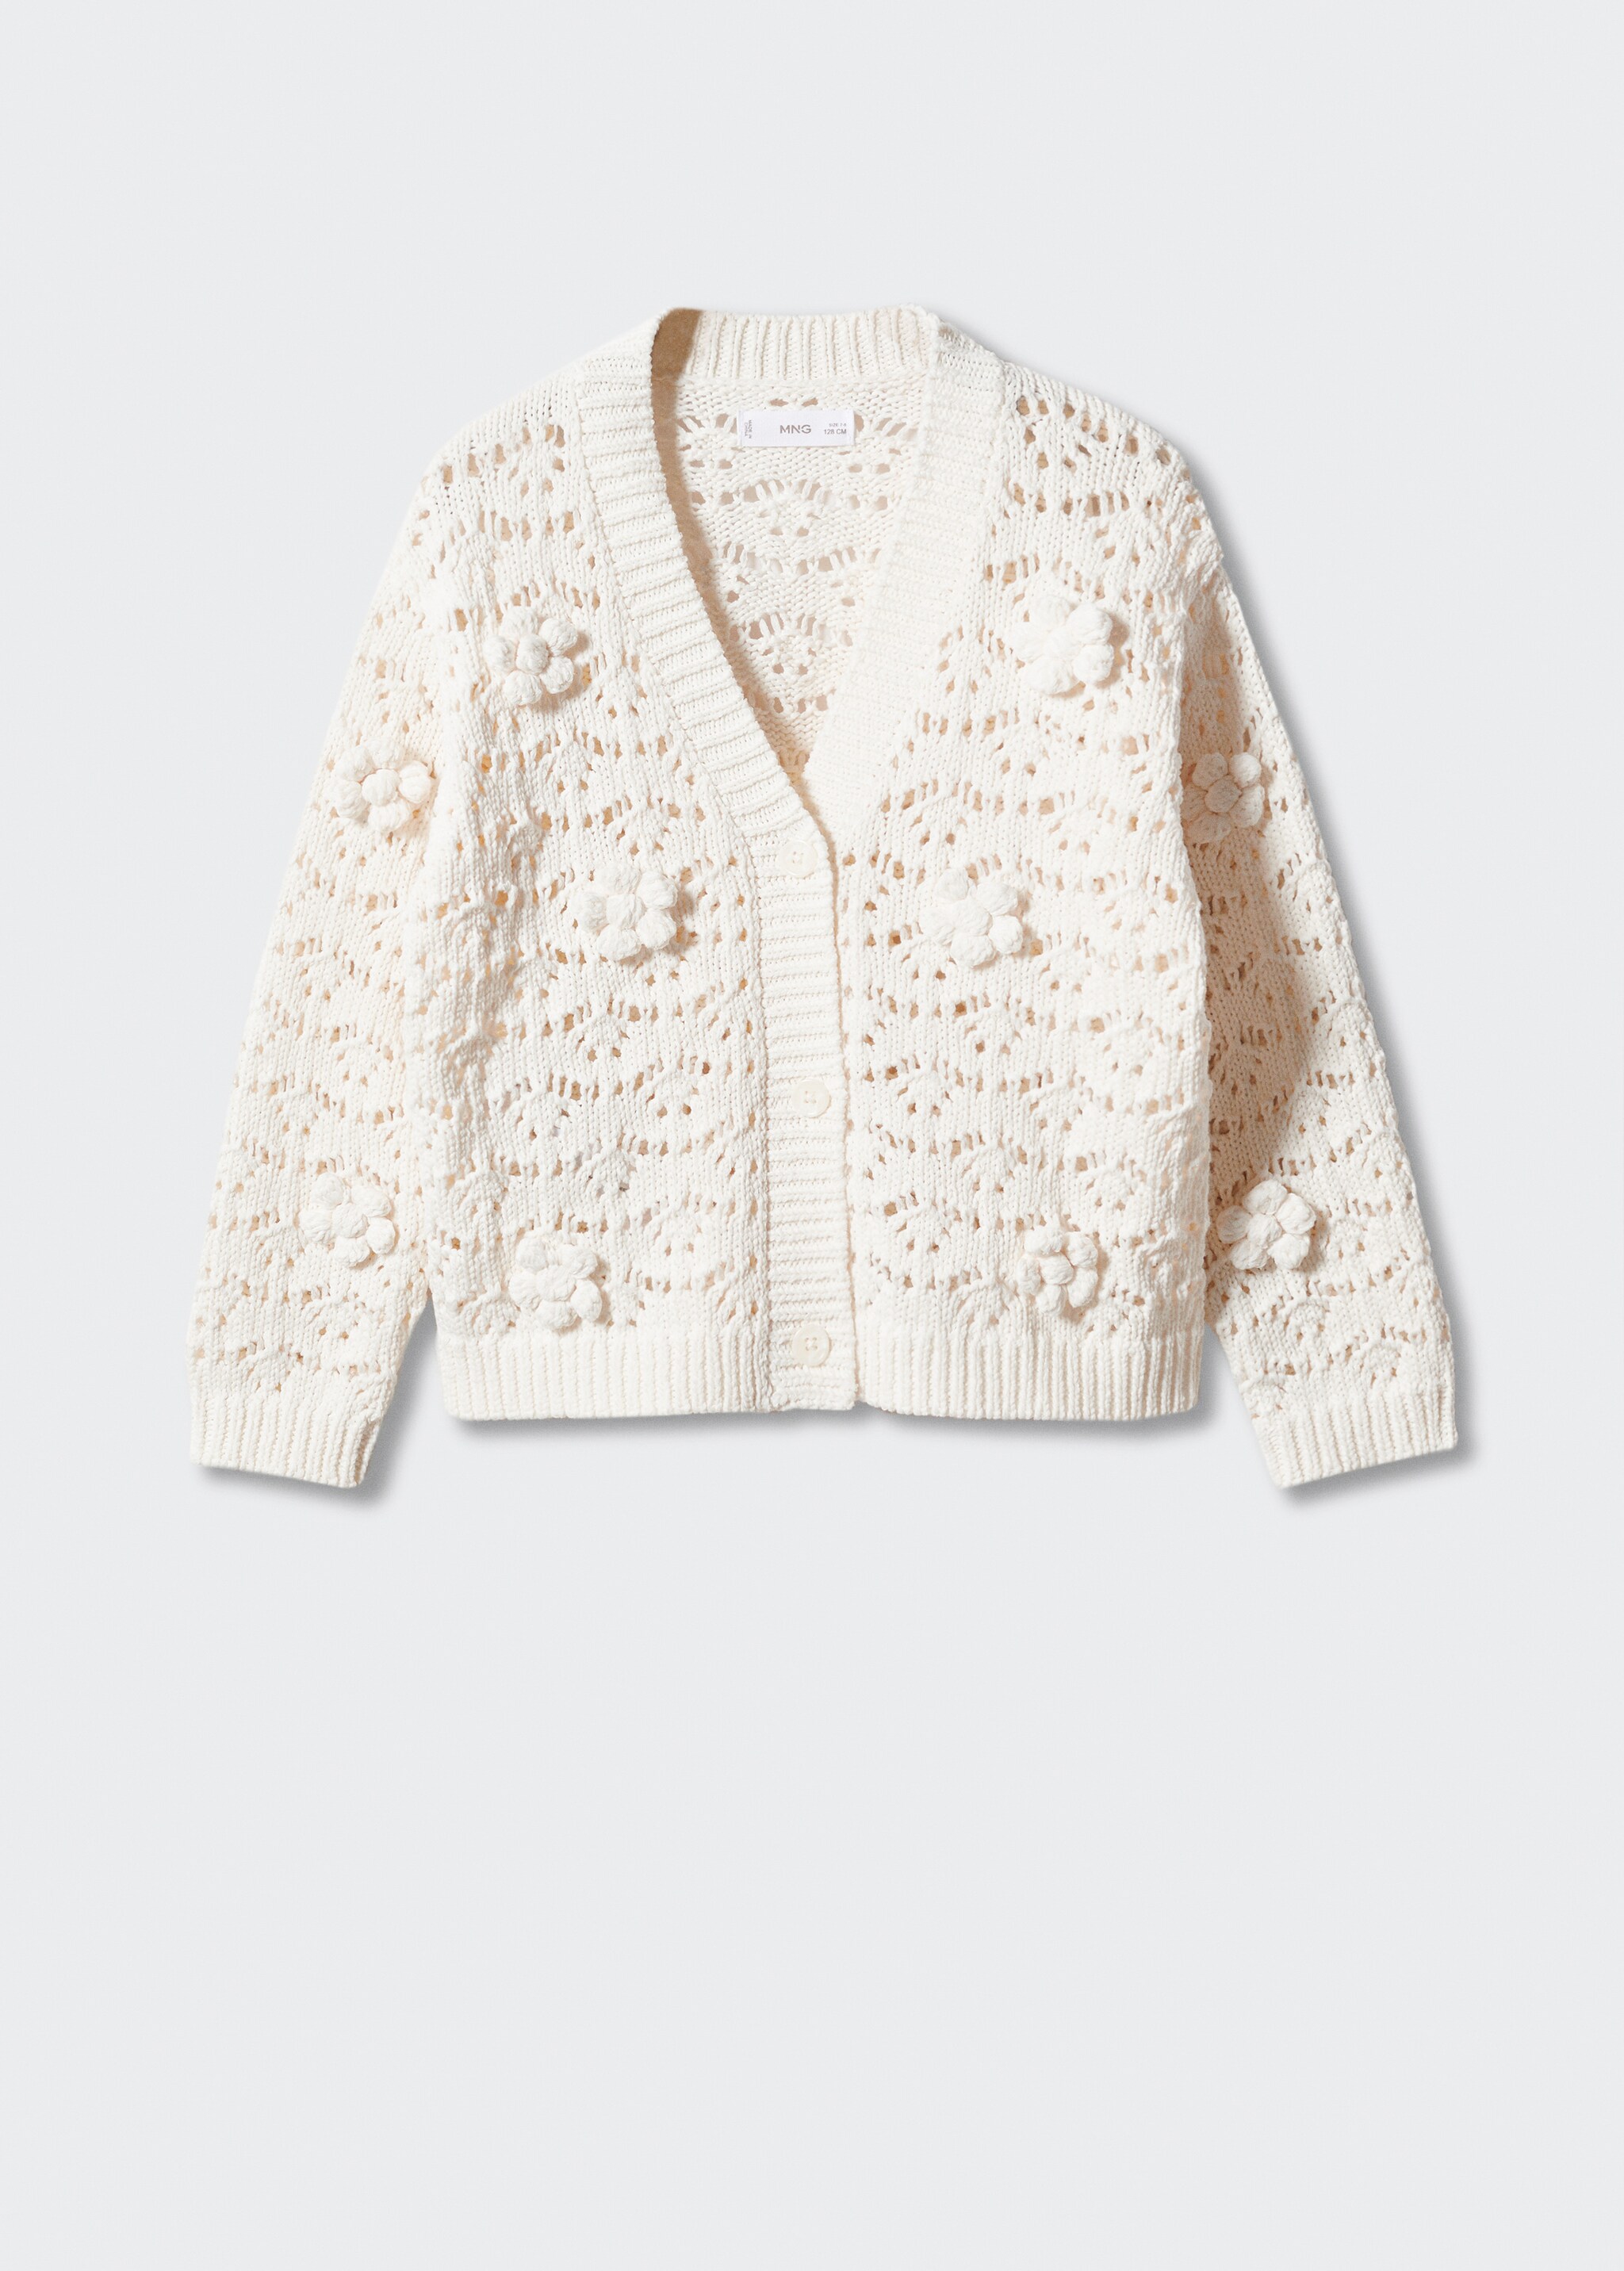 Openwork knit cardigan - Article without model